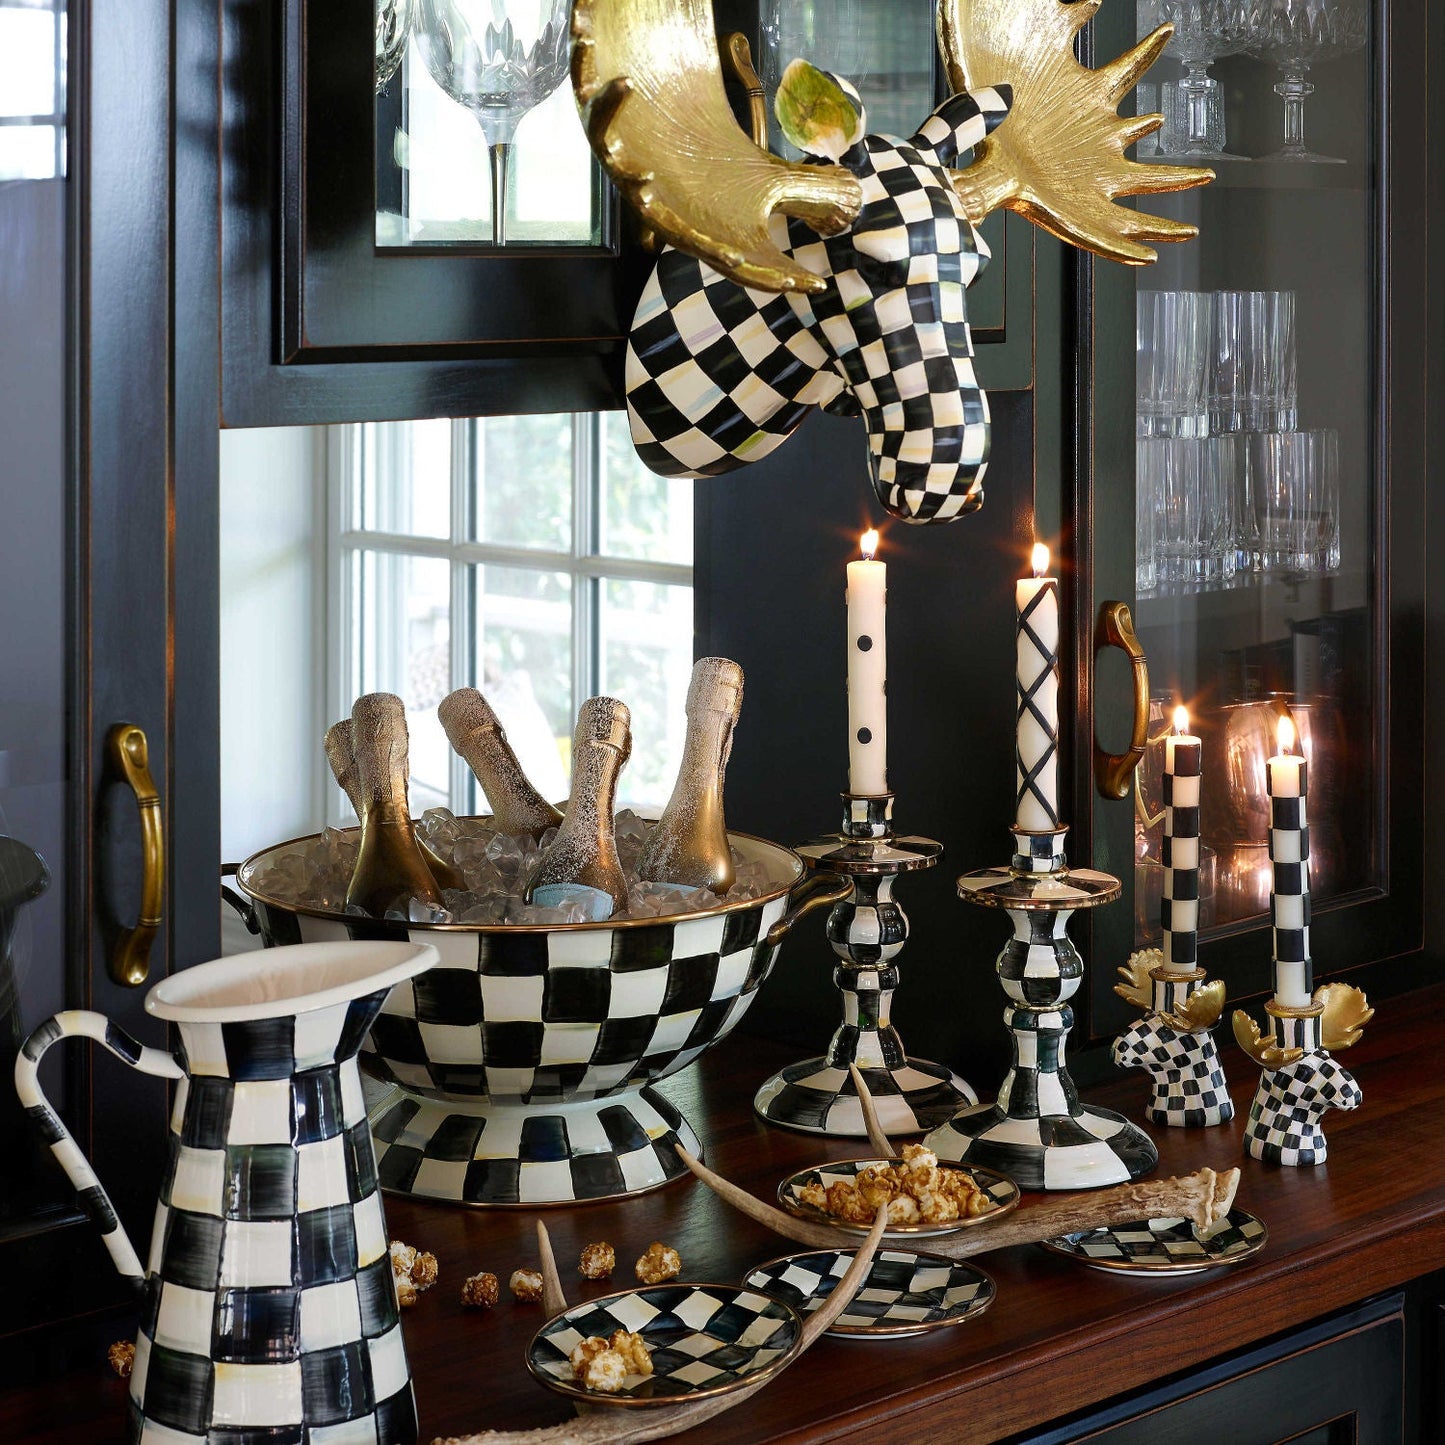 Courtly Check Everything Bowl Large by Mackenzie Childs - |VESIMI Design|